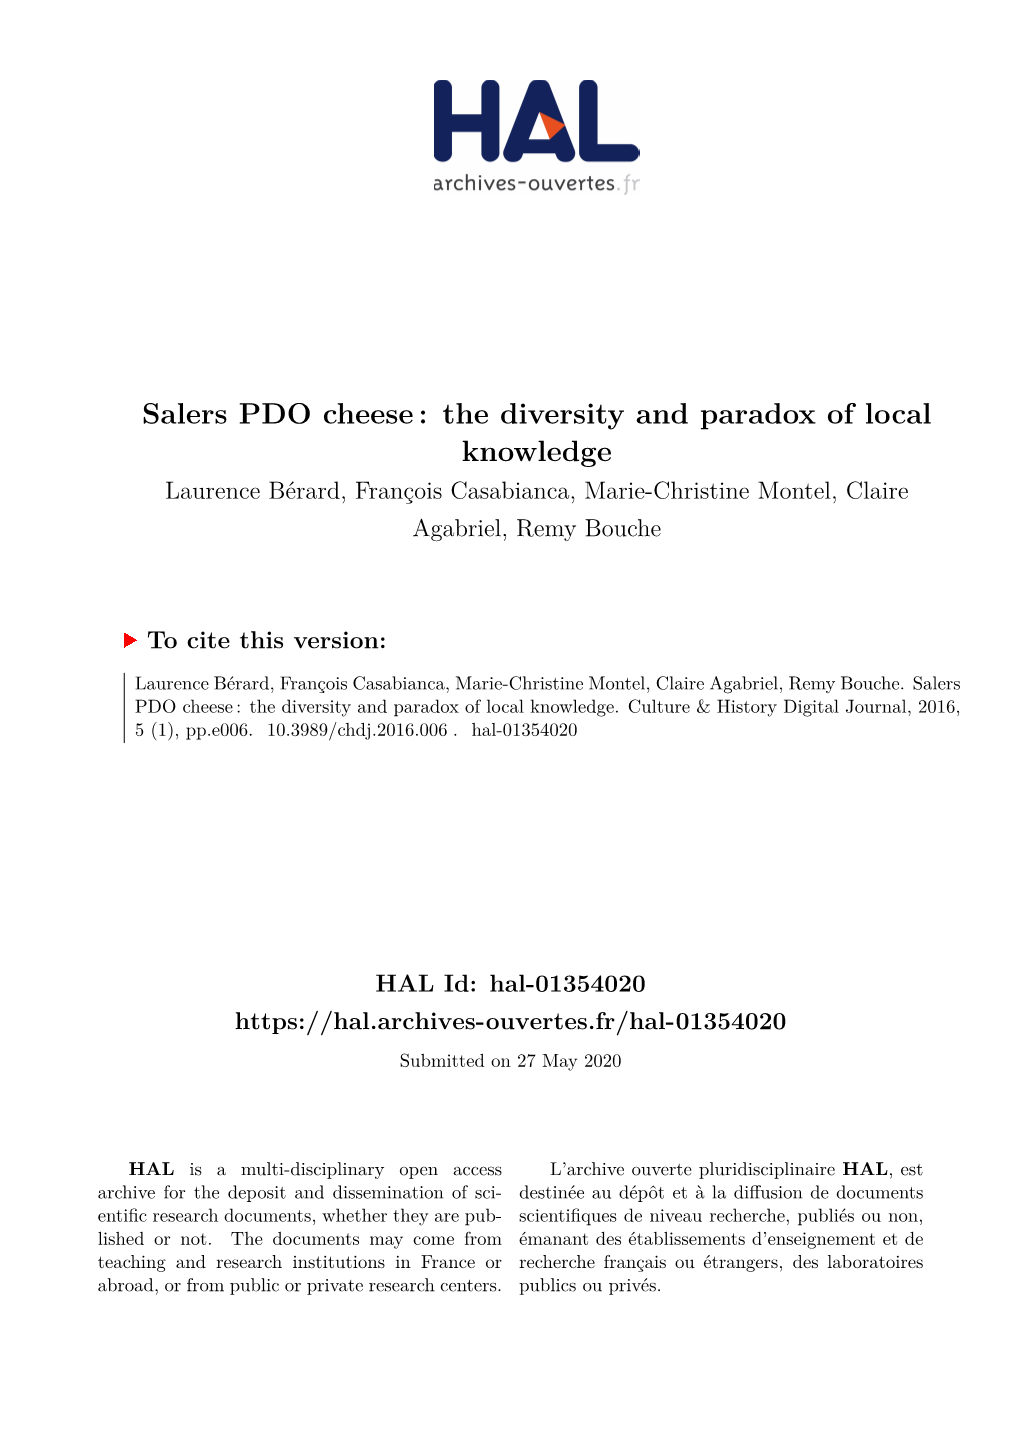 Salers PDO Cheese : the Diversity and Paradox of Local Knowledge Laurence Bérard, François Casabianca, Marie-Christine Montel, Claire Agabriel, Remy Bouche